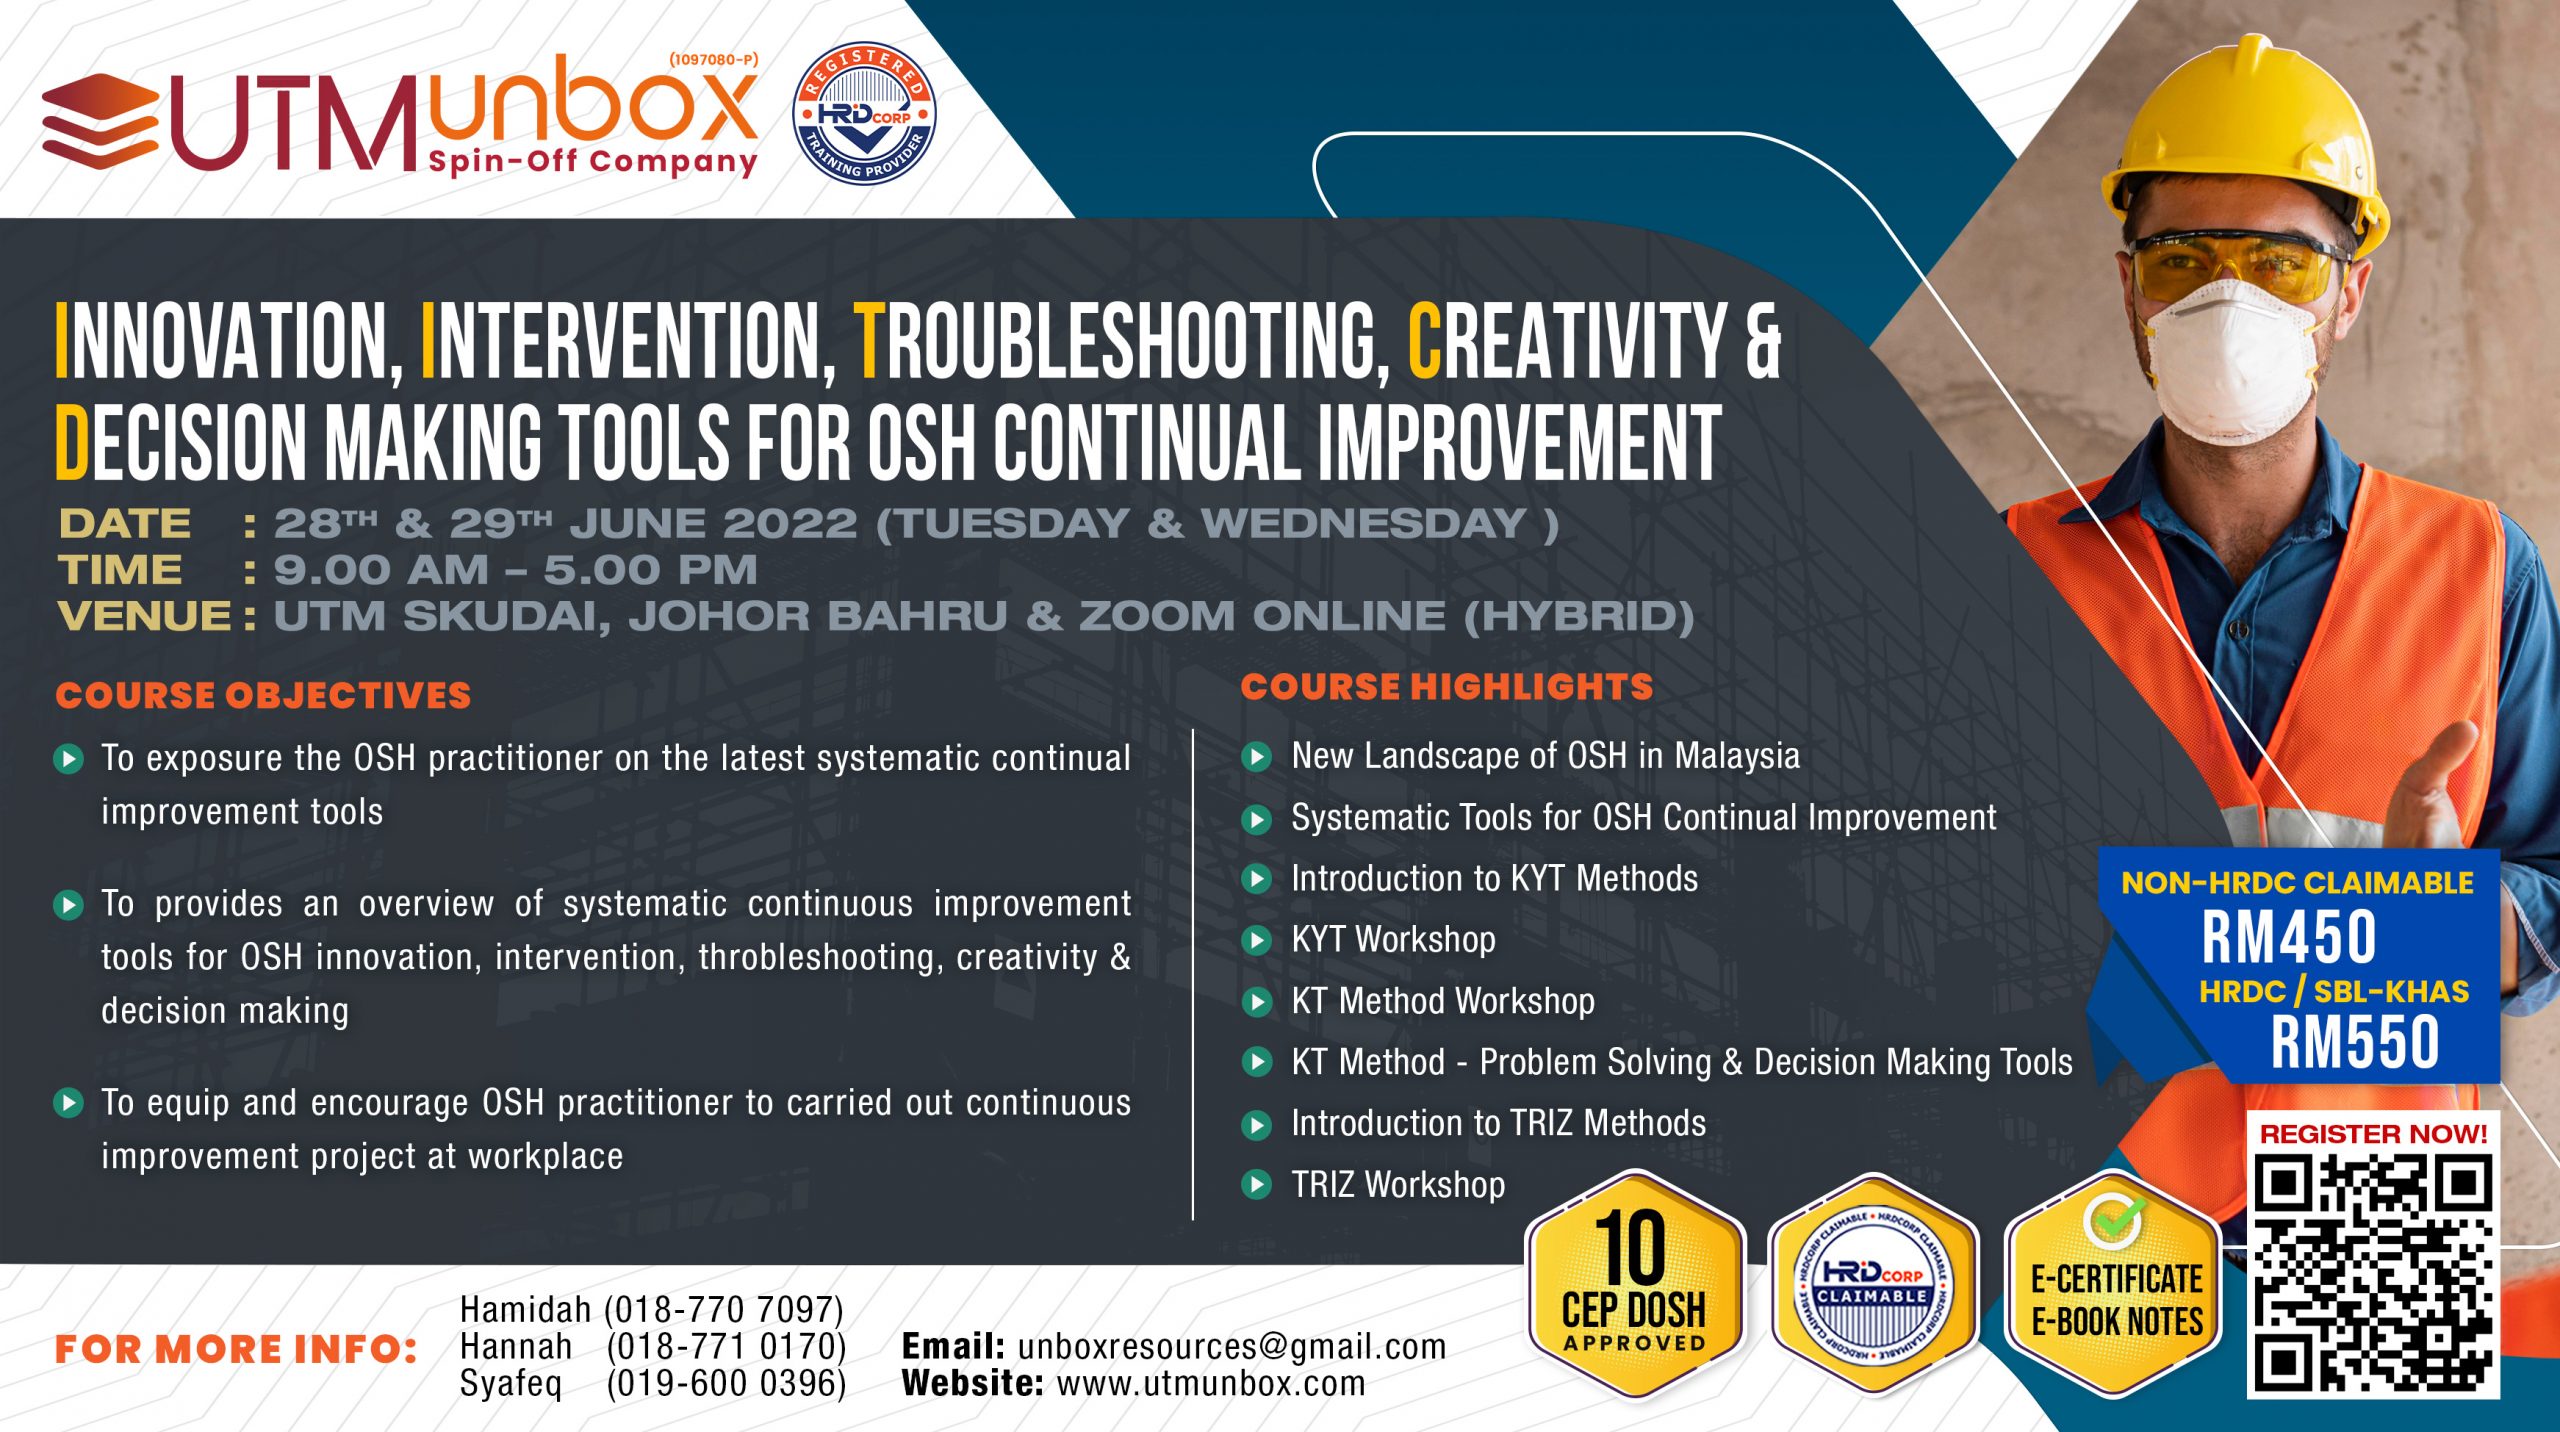 You are currently viewing INNOVATION, INTERVENTION, TROUBLESHOOTING, CREATIVITY & DECISION MAKING TOOLS FOR OSH CONTINUAL IMPROVEMENT